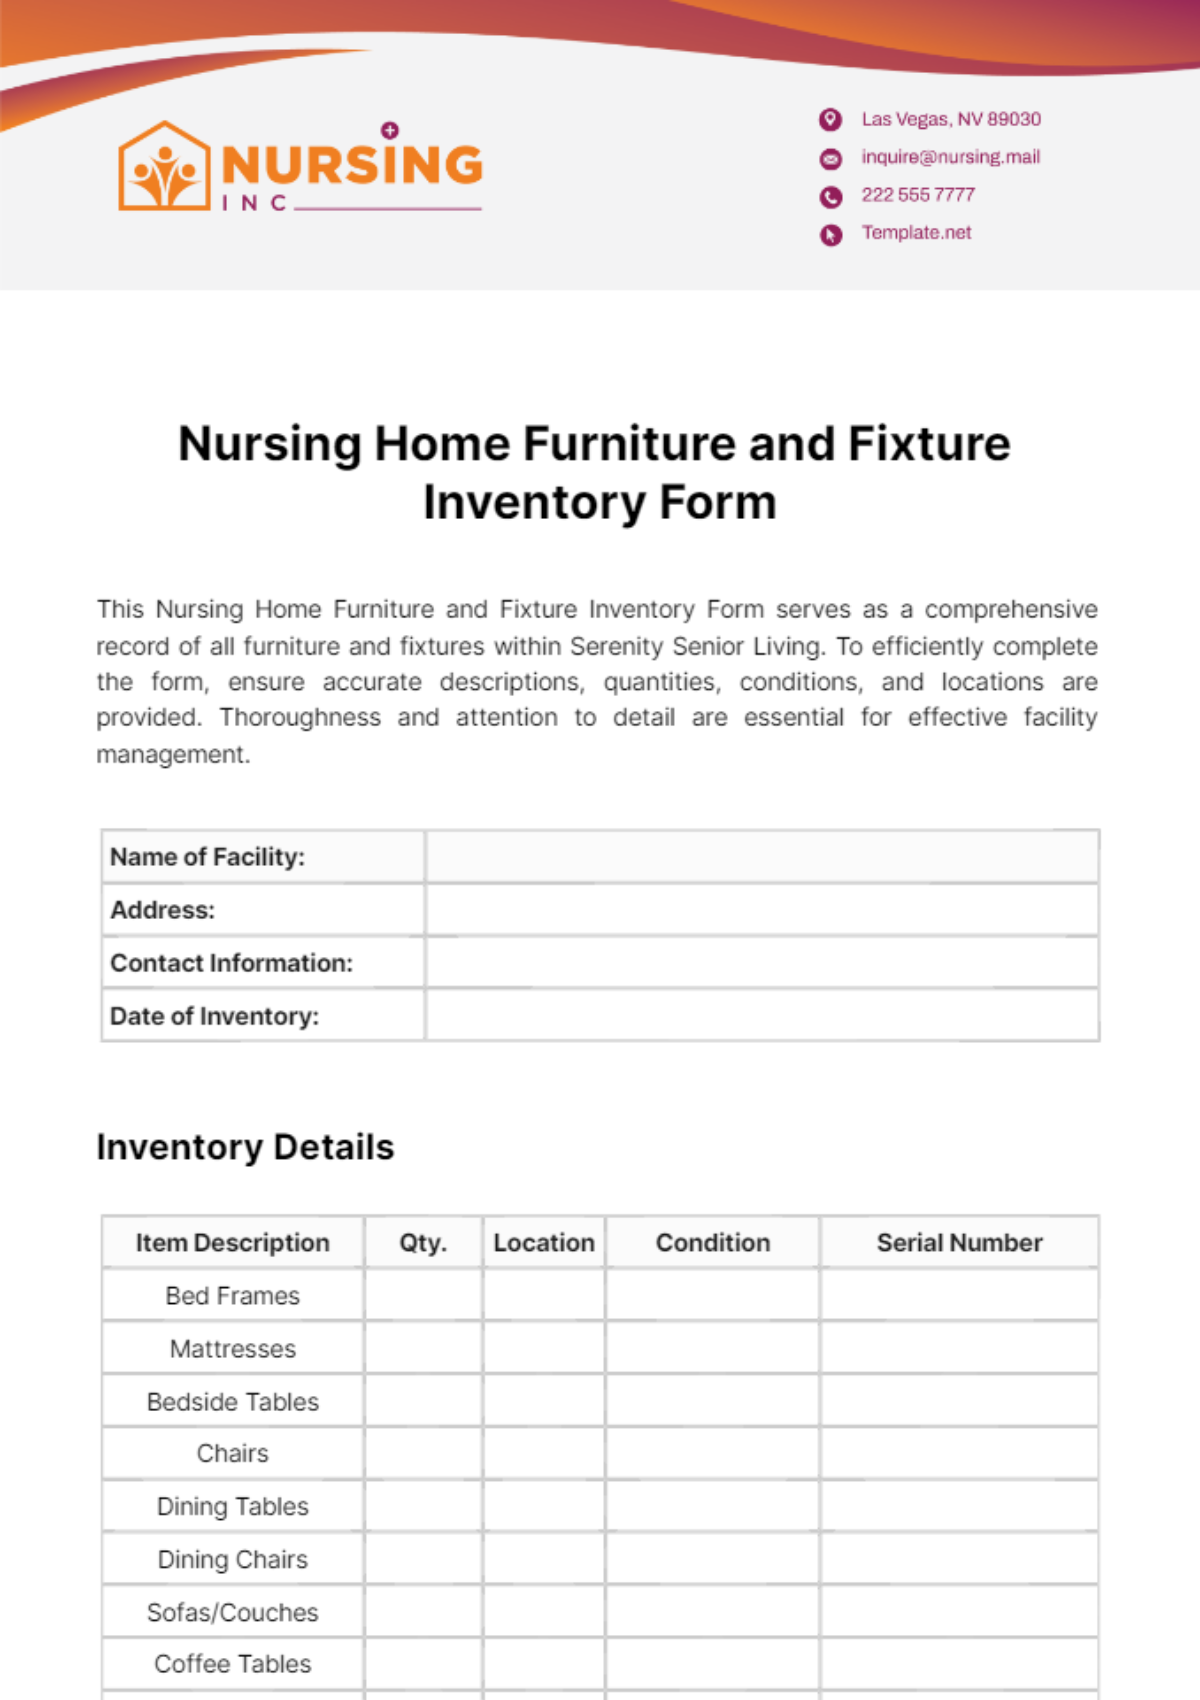 Free Nursing Home Furniture and Fixture Inventory Form Template